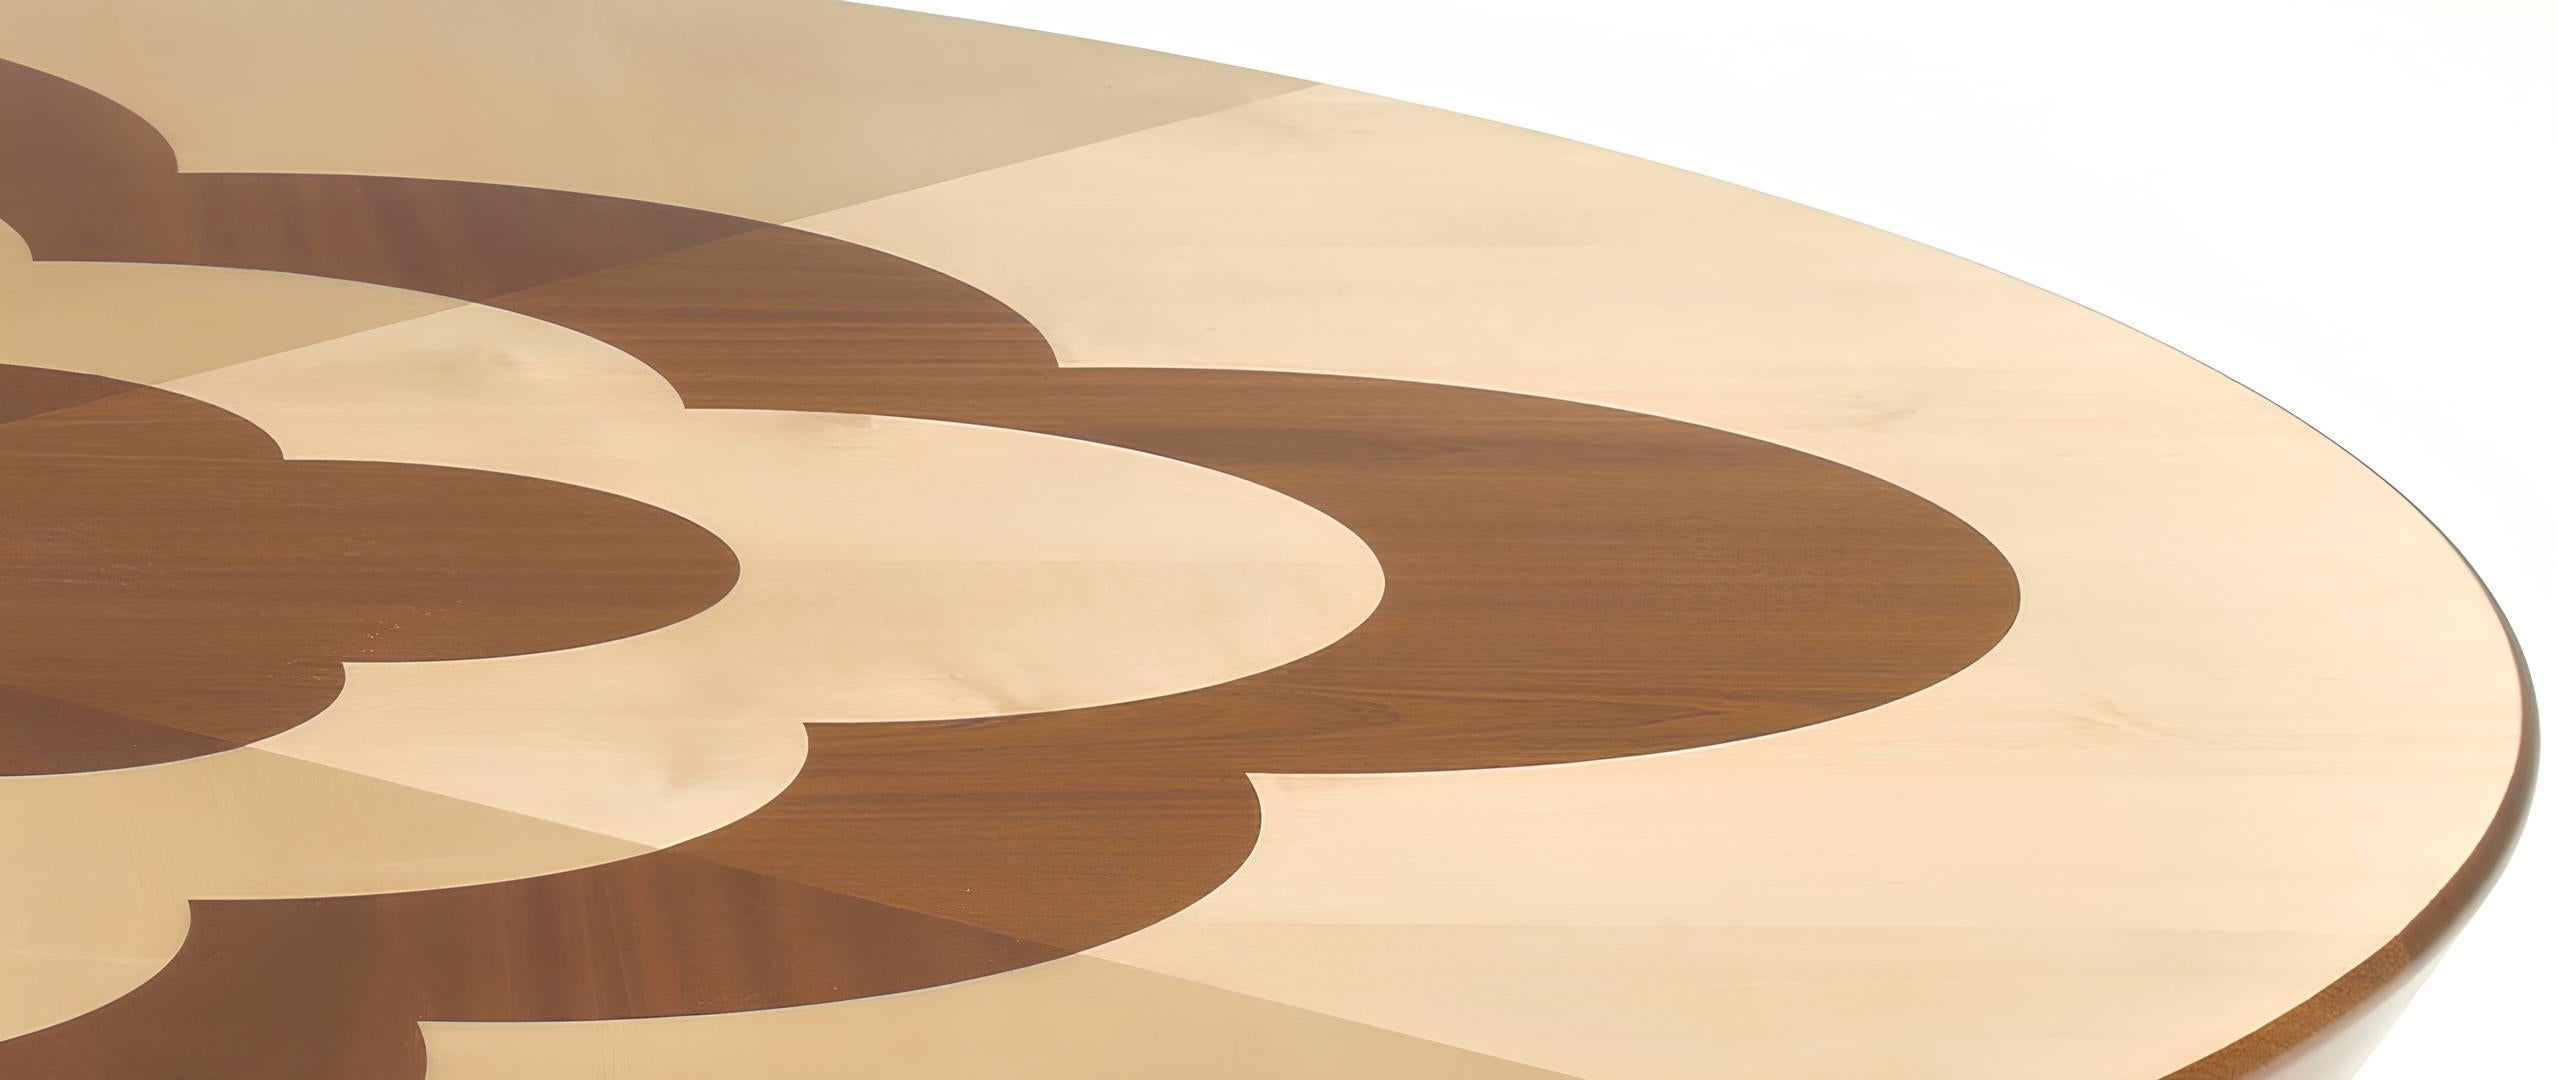 Archway CT is a cocktail table designed by the Argentinian designer Cristián Mohaded in 2022. Crafted with meticulous attention to detail, this round table is made from solid mahogany and maple wood, featuring an exquisite inlay design of a mahogany